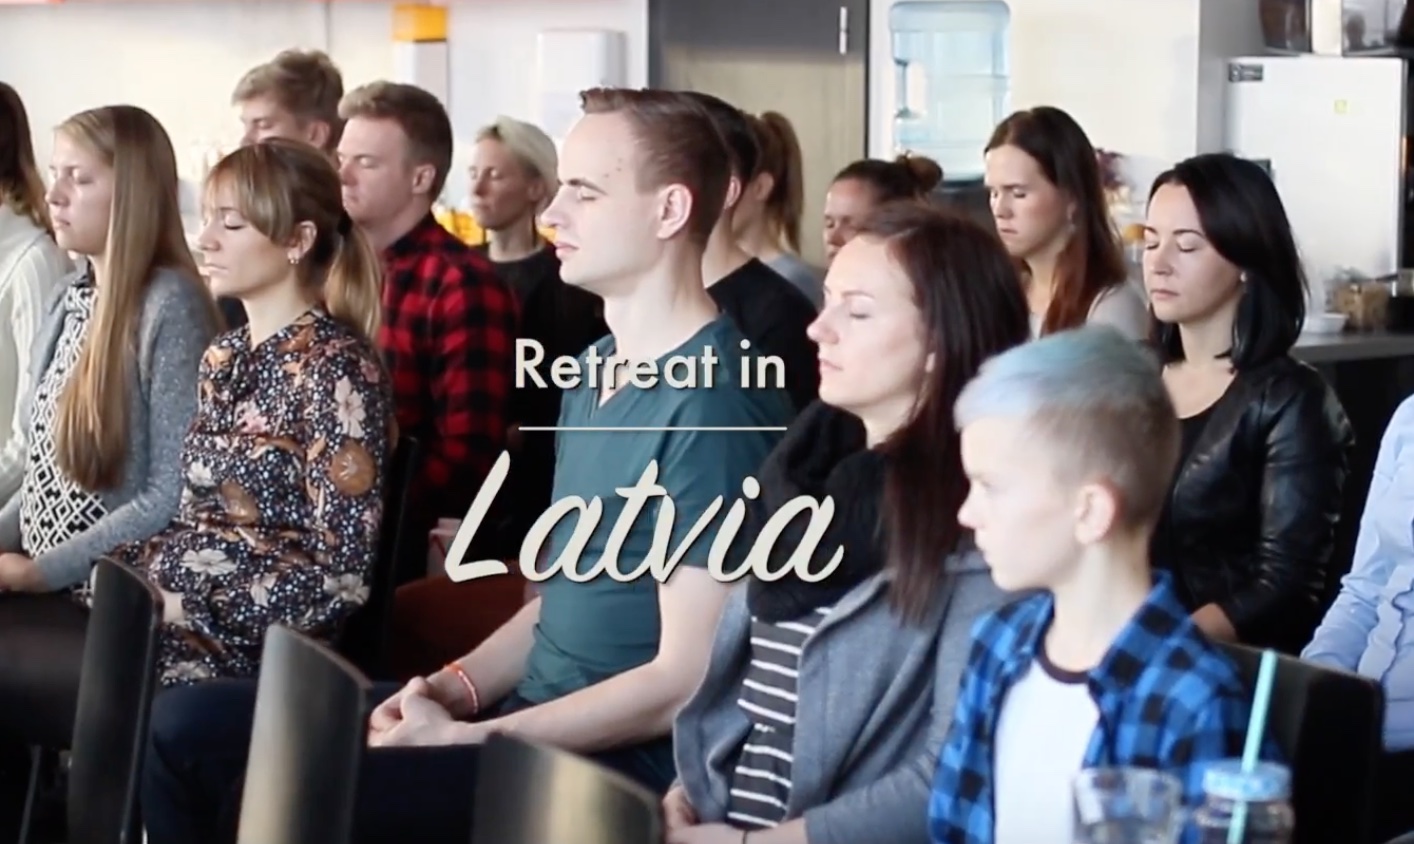 image from In to the East: Meditation Retreat in Latvia